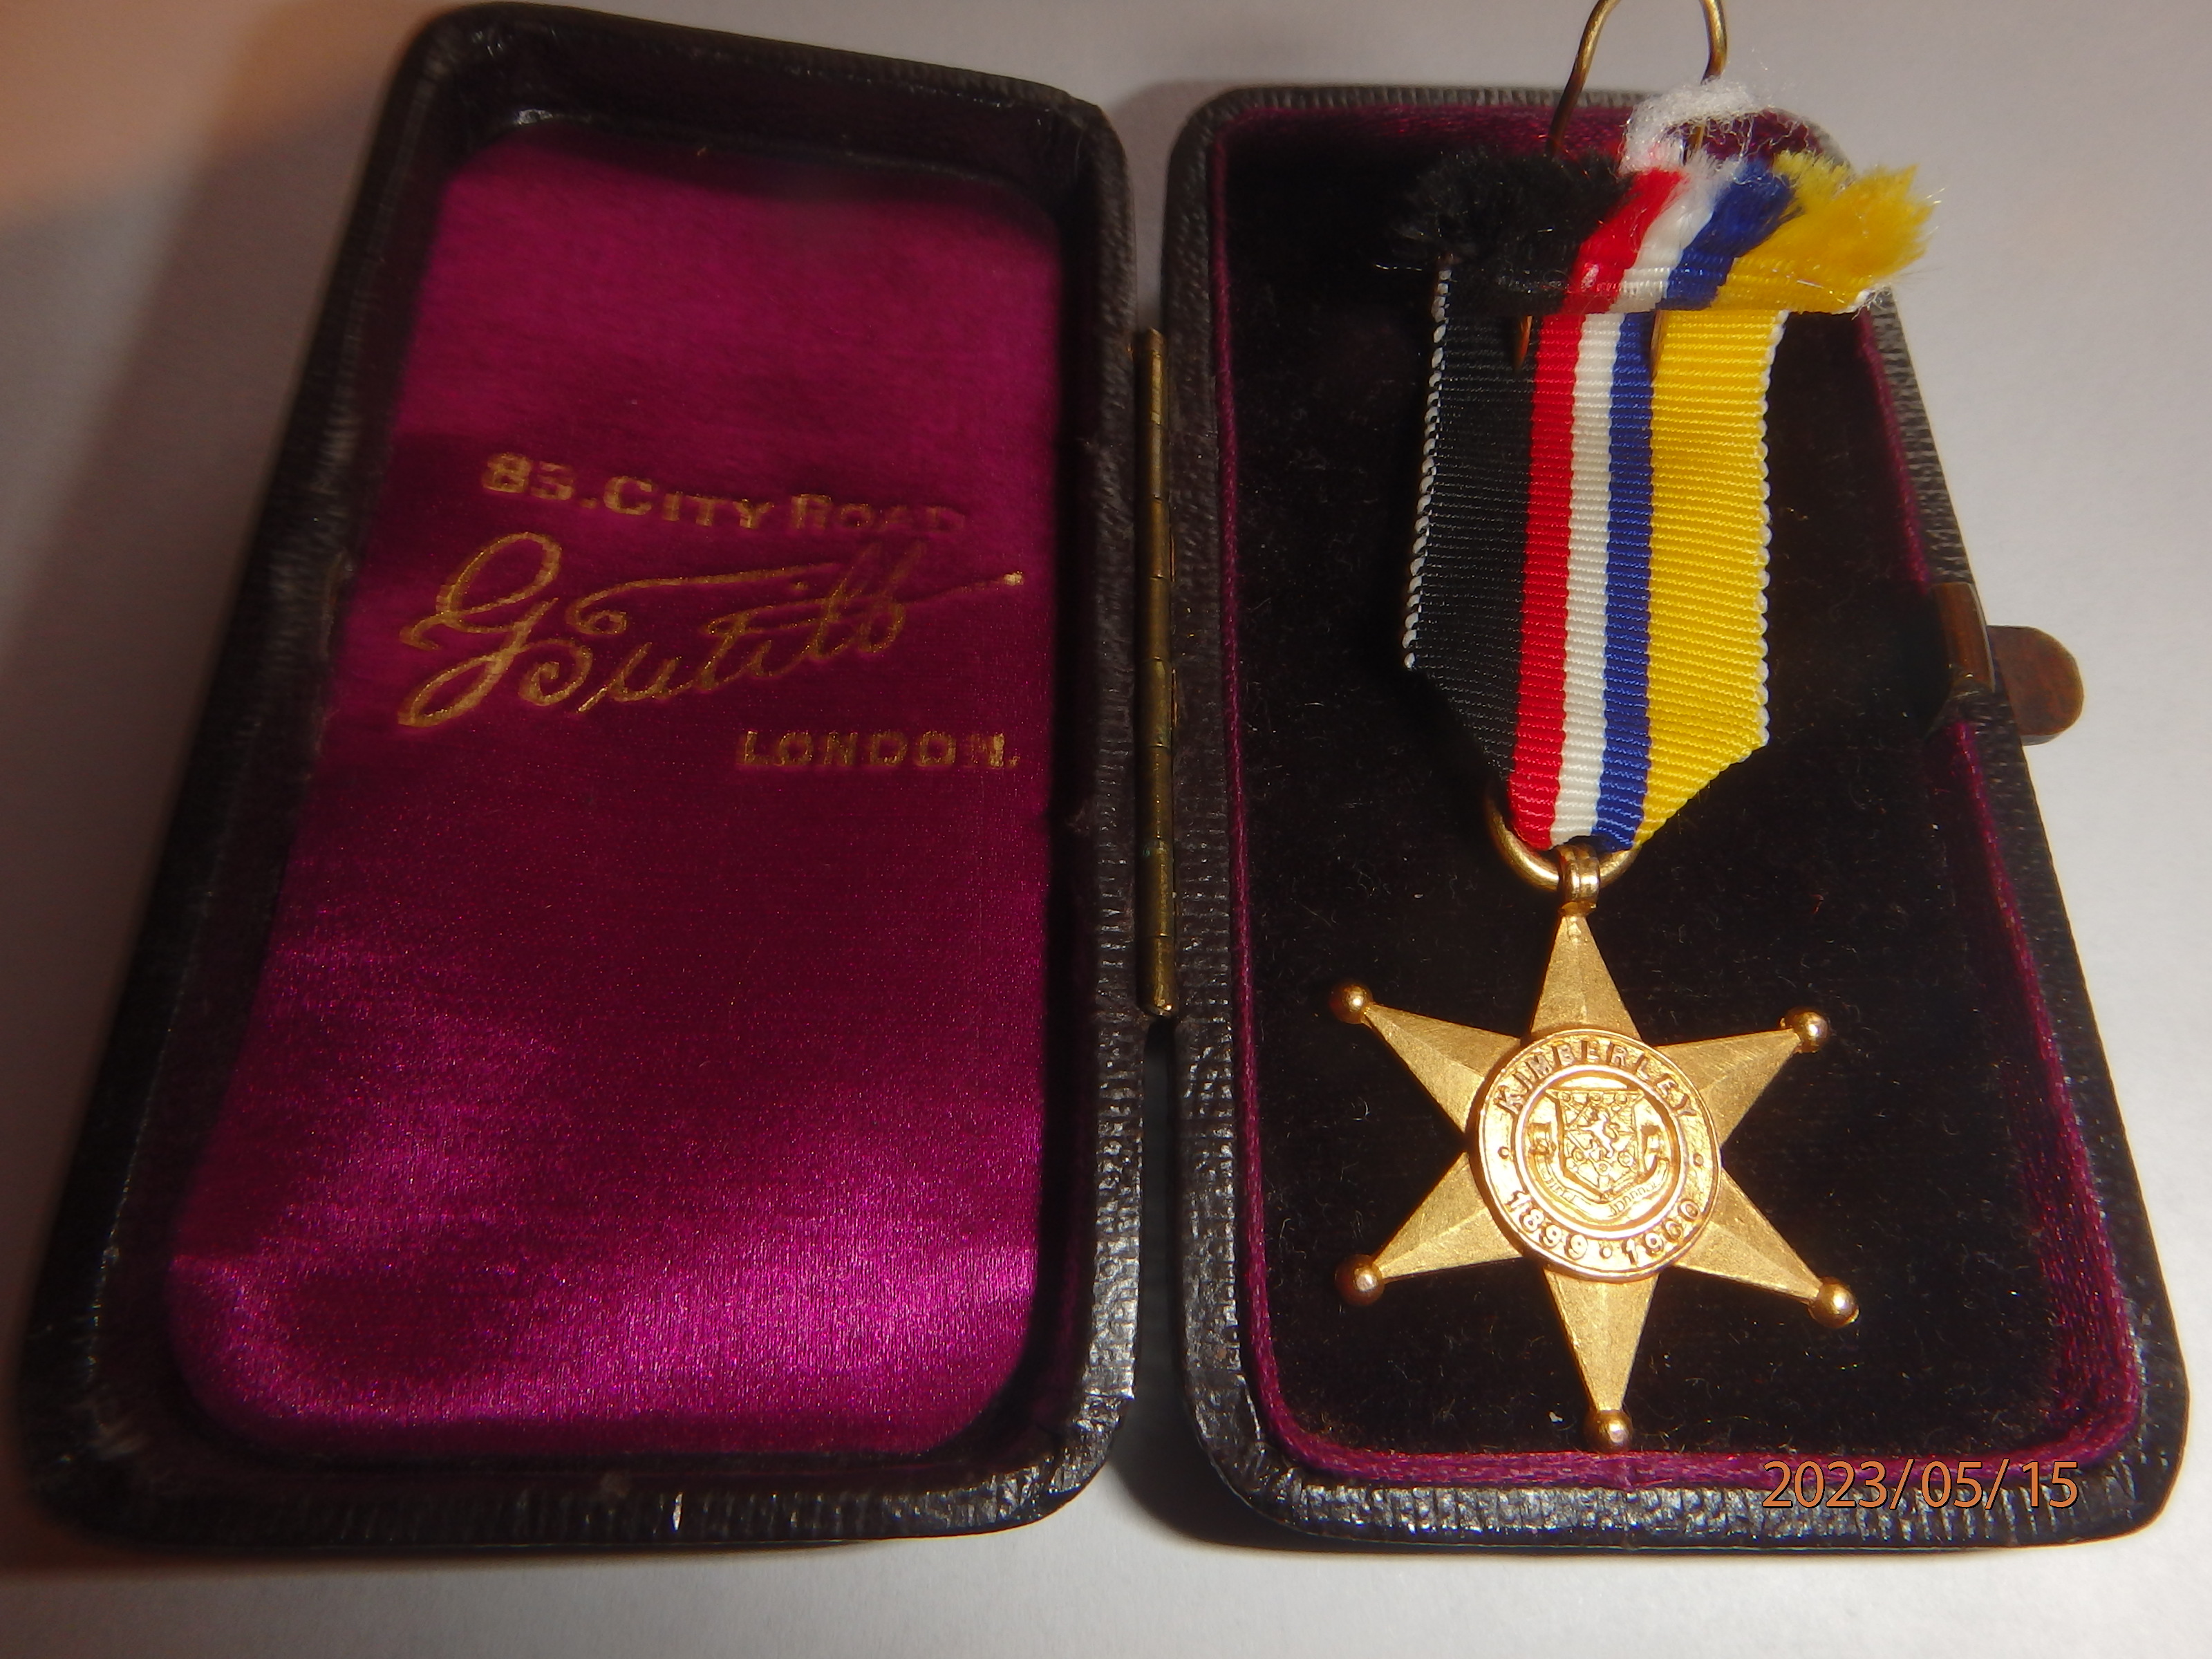 Miniature Gold Kimberley Star Medal in case